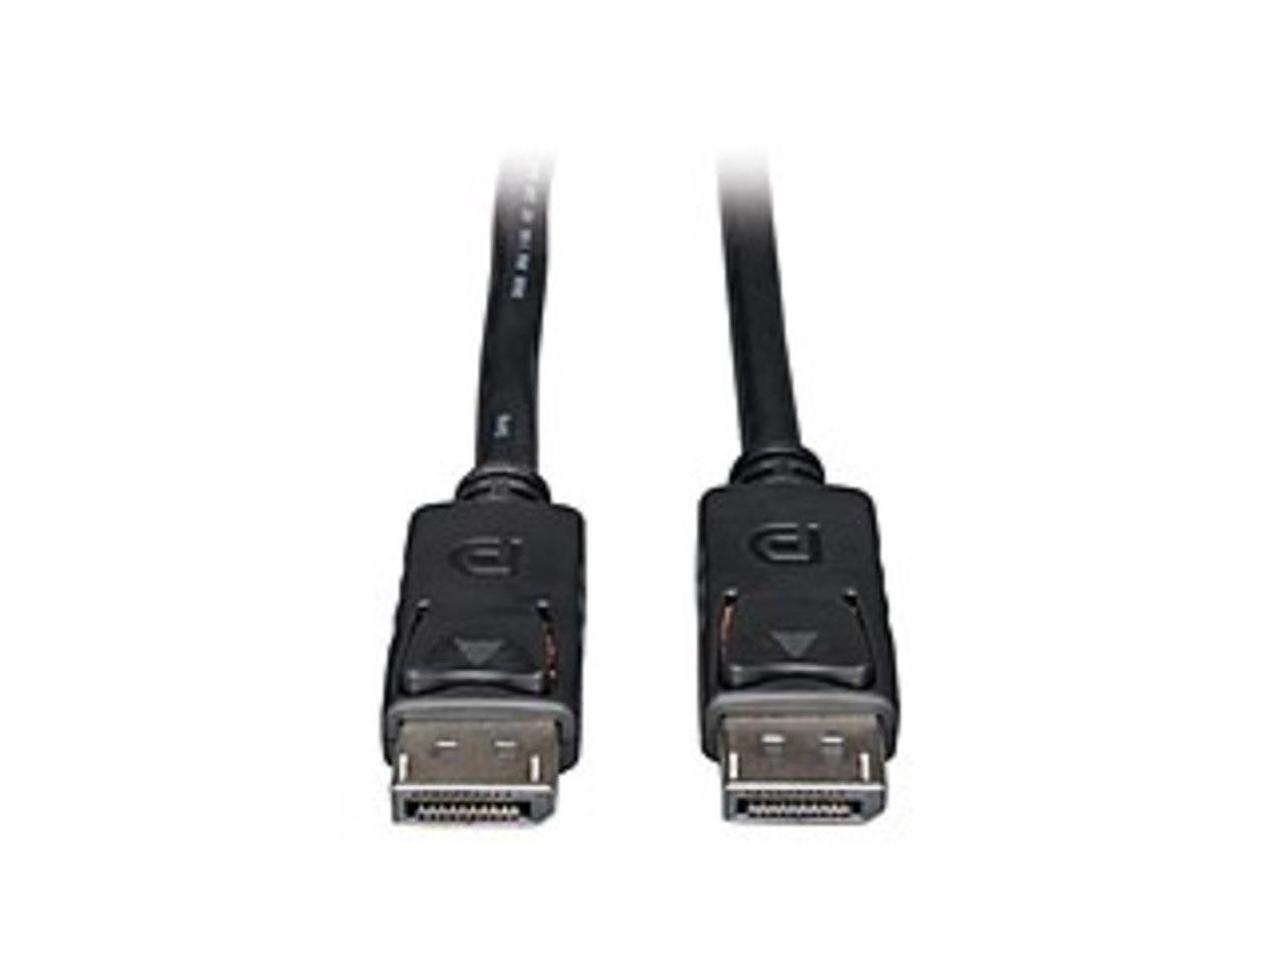 Tripp Lite P580-006 6 ft. Black DisplayPort to DisplayPort Cable with Latches